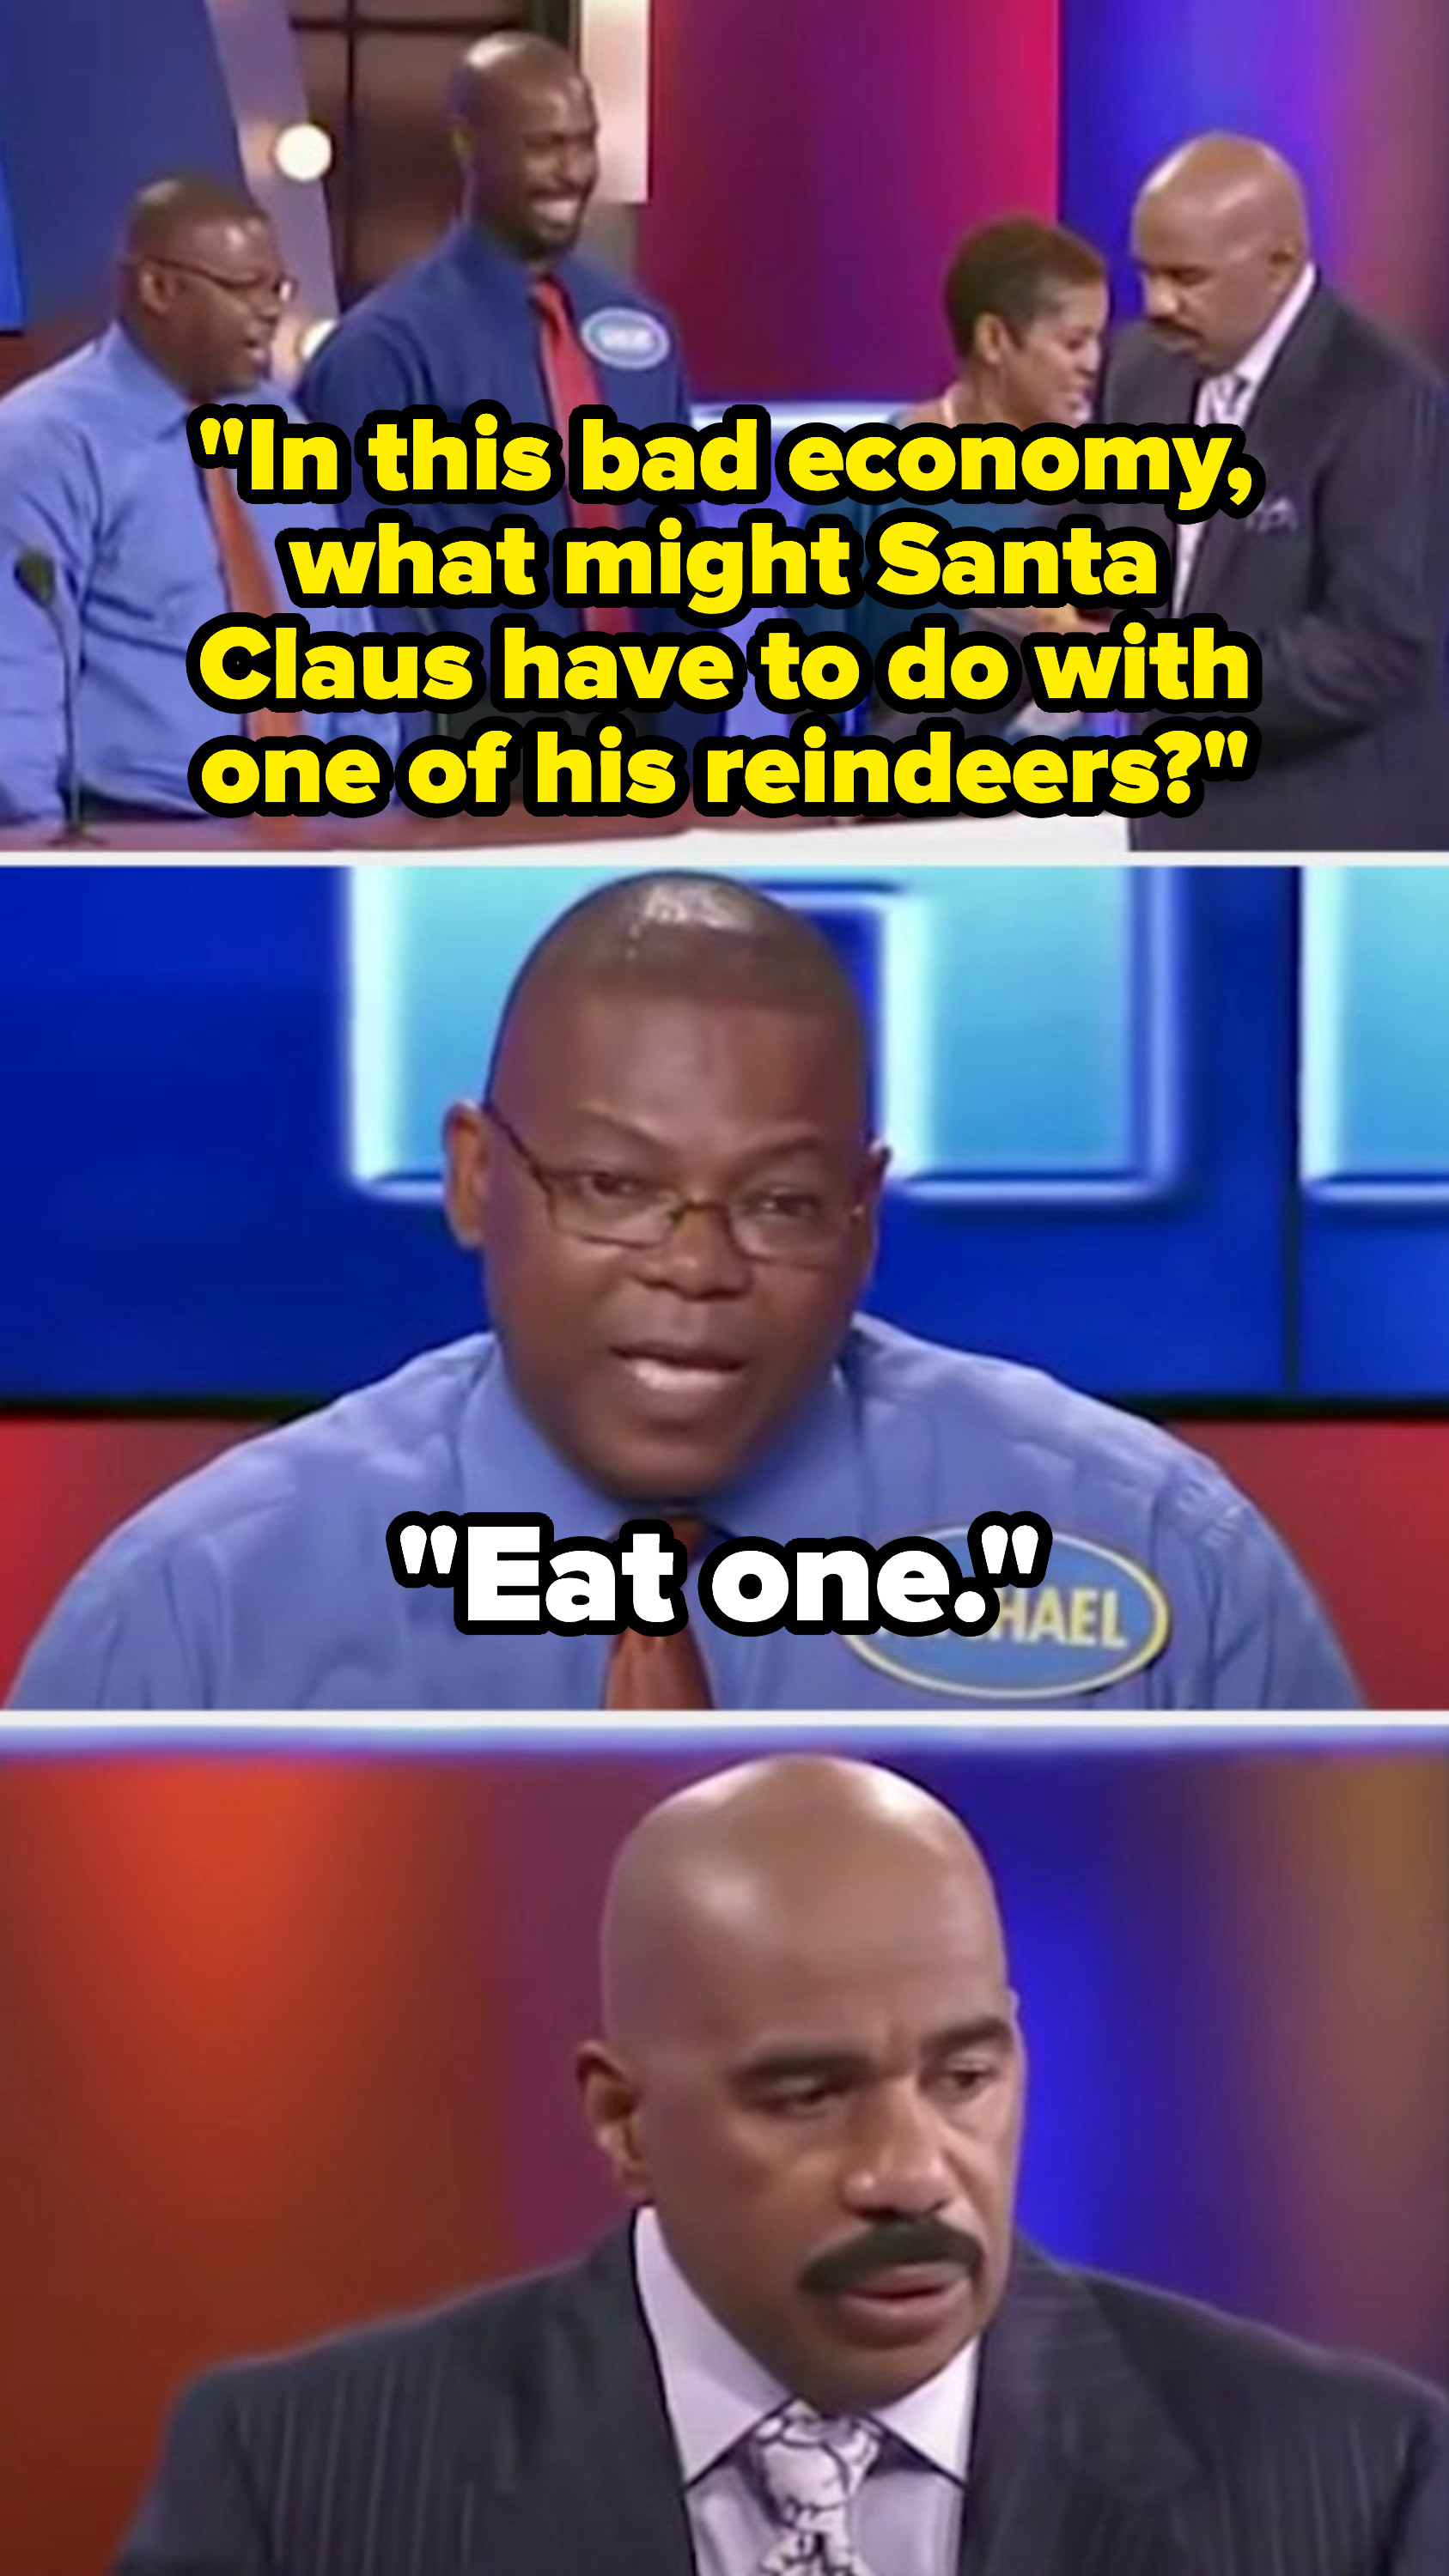 Steve asks, &quot;In this bad economy, what might Santa Claus have to do with one of his reindeers?&quot; and a contestant says, &quot;Eat one,&quot; leaving Steve looking deeply concerned